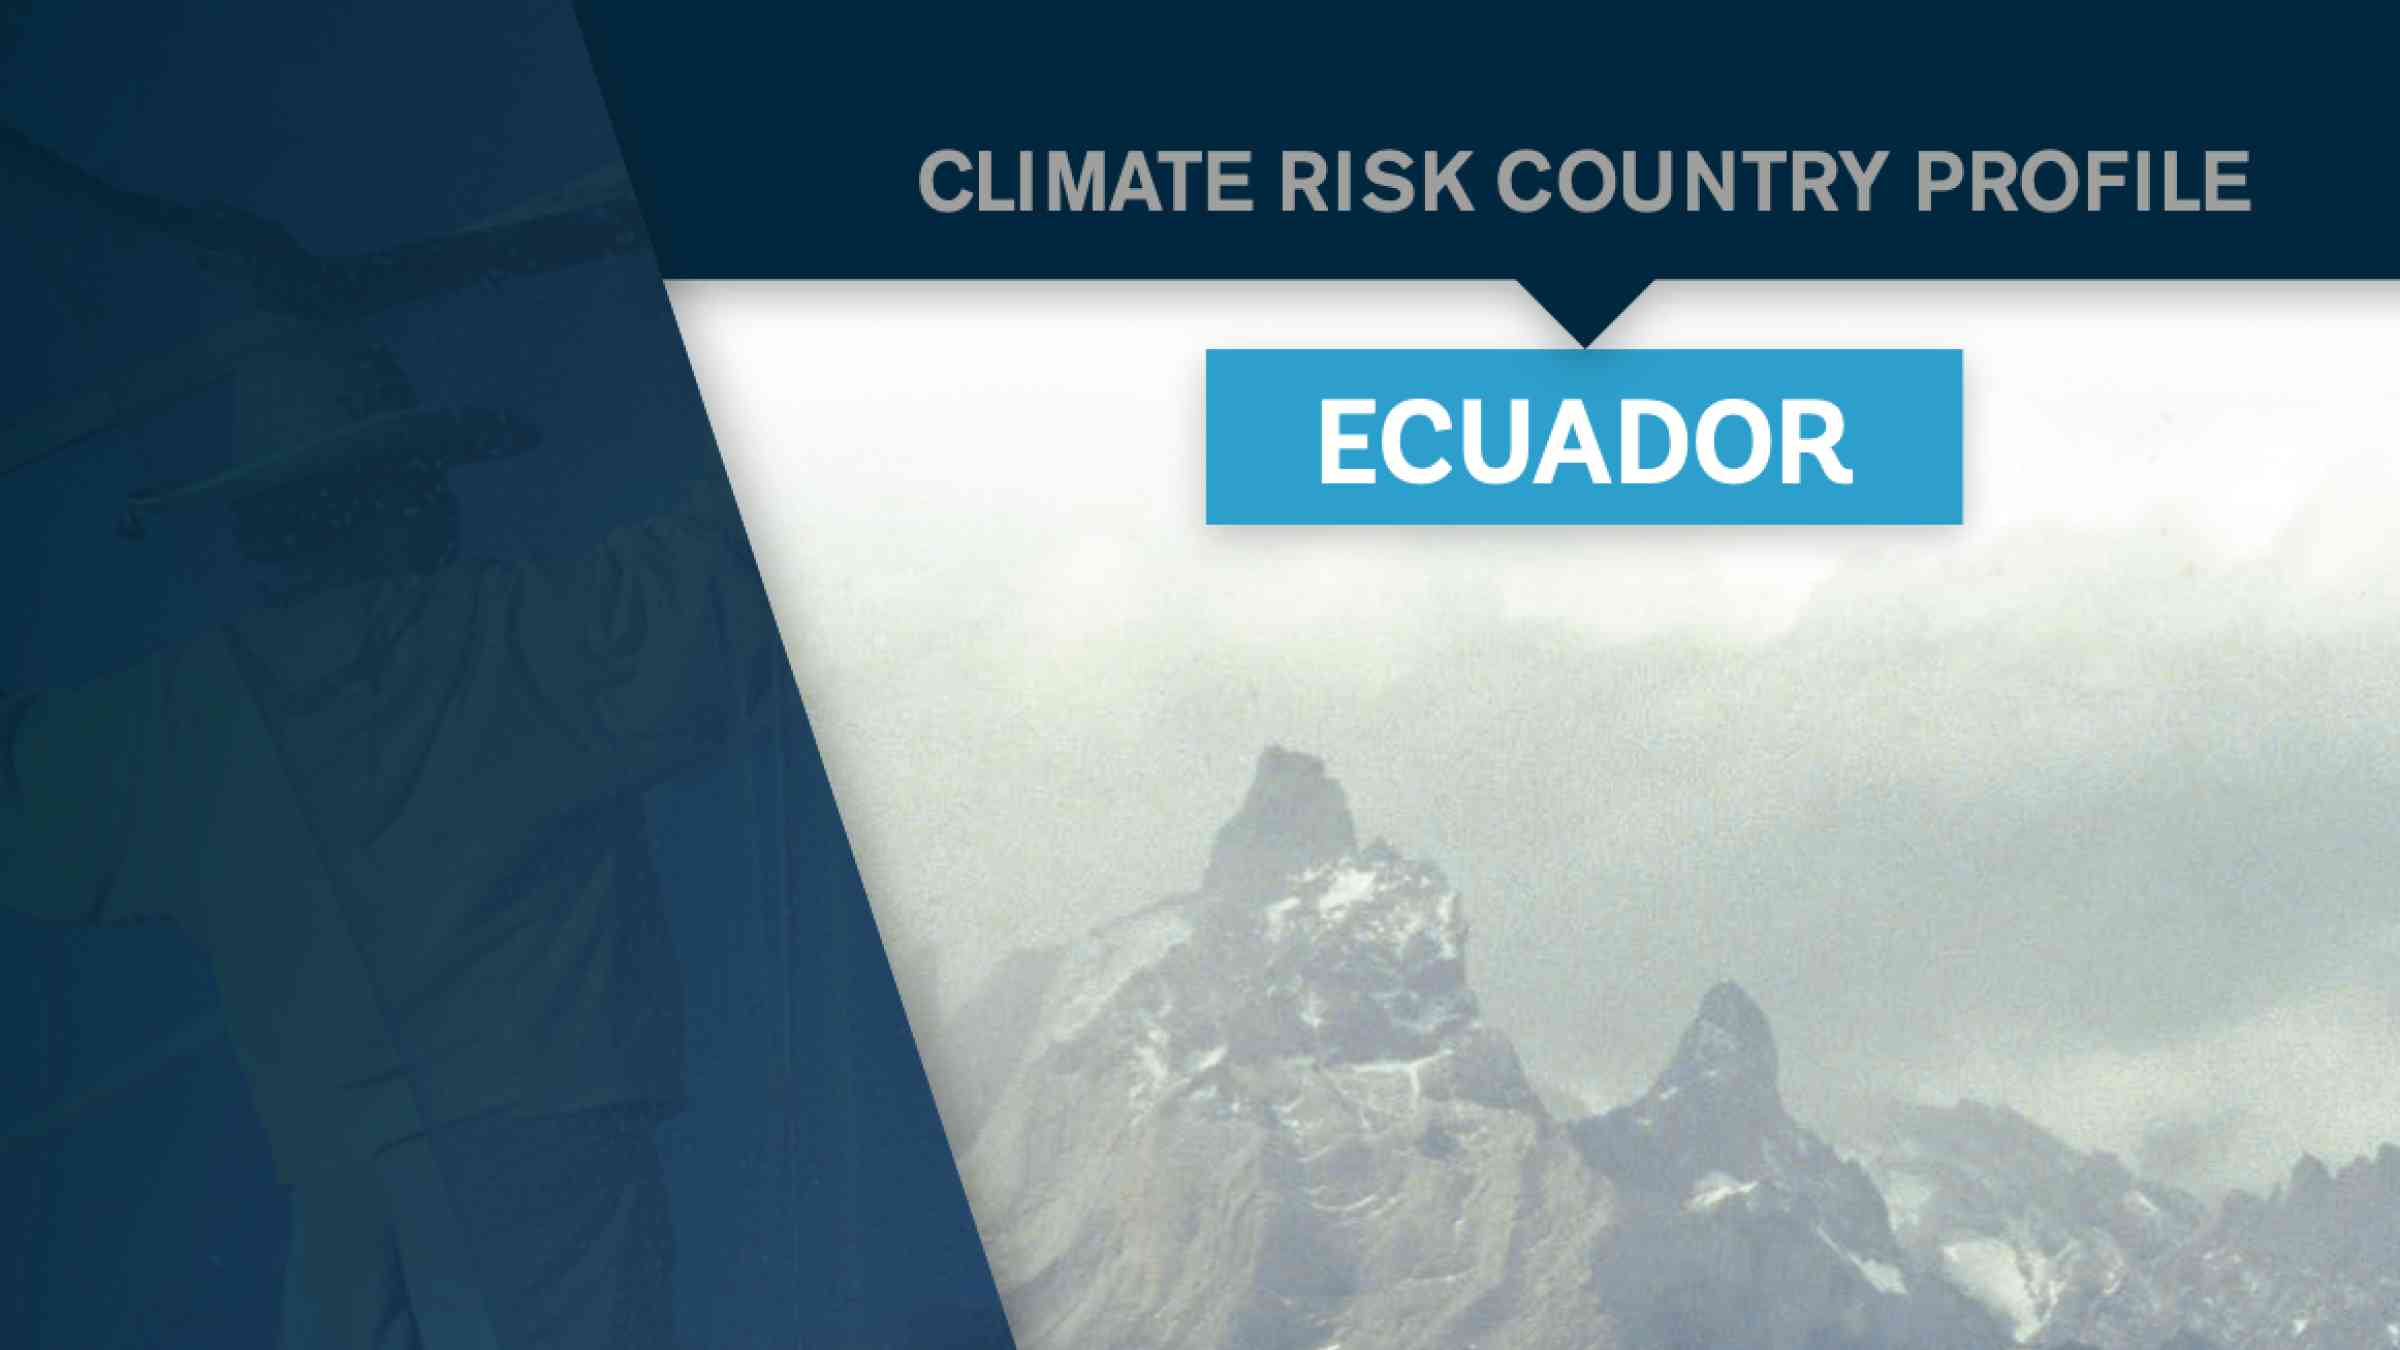 This image shows the coverpage of "Climate risk country profile: Ecuador"